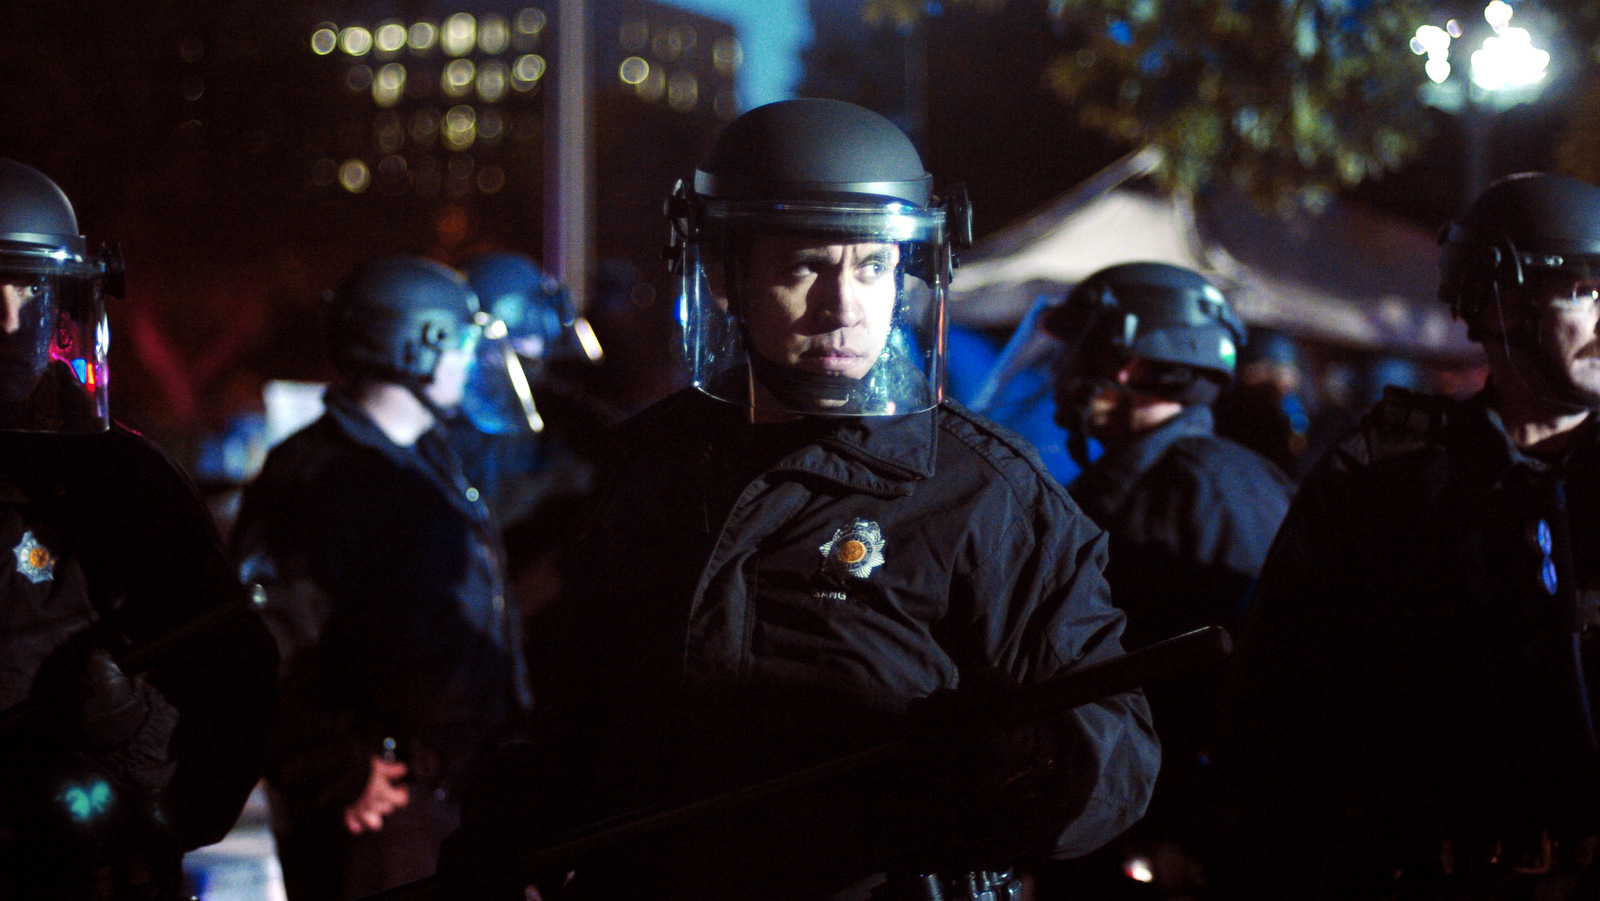 Riot police amass at the Occupy Denver protest in front of the state Capitol building Friday, Oct. 14, 2011. (AP Photo/Thomas Peipert)